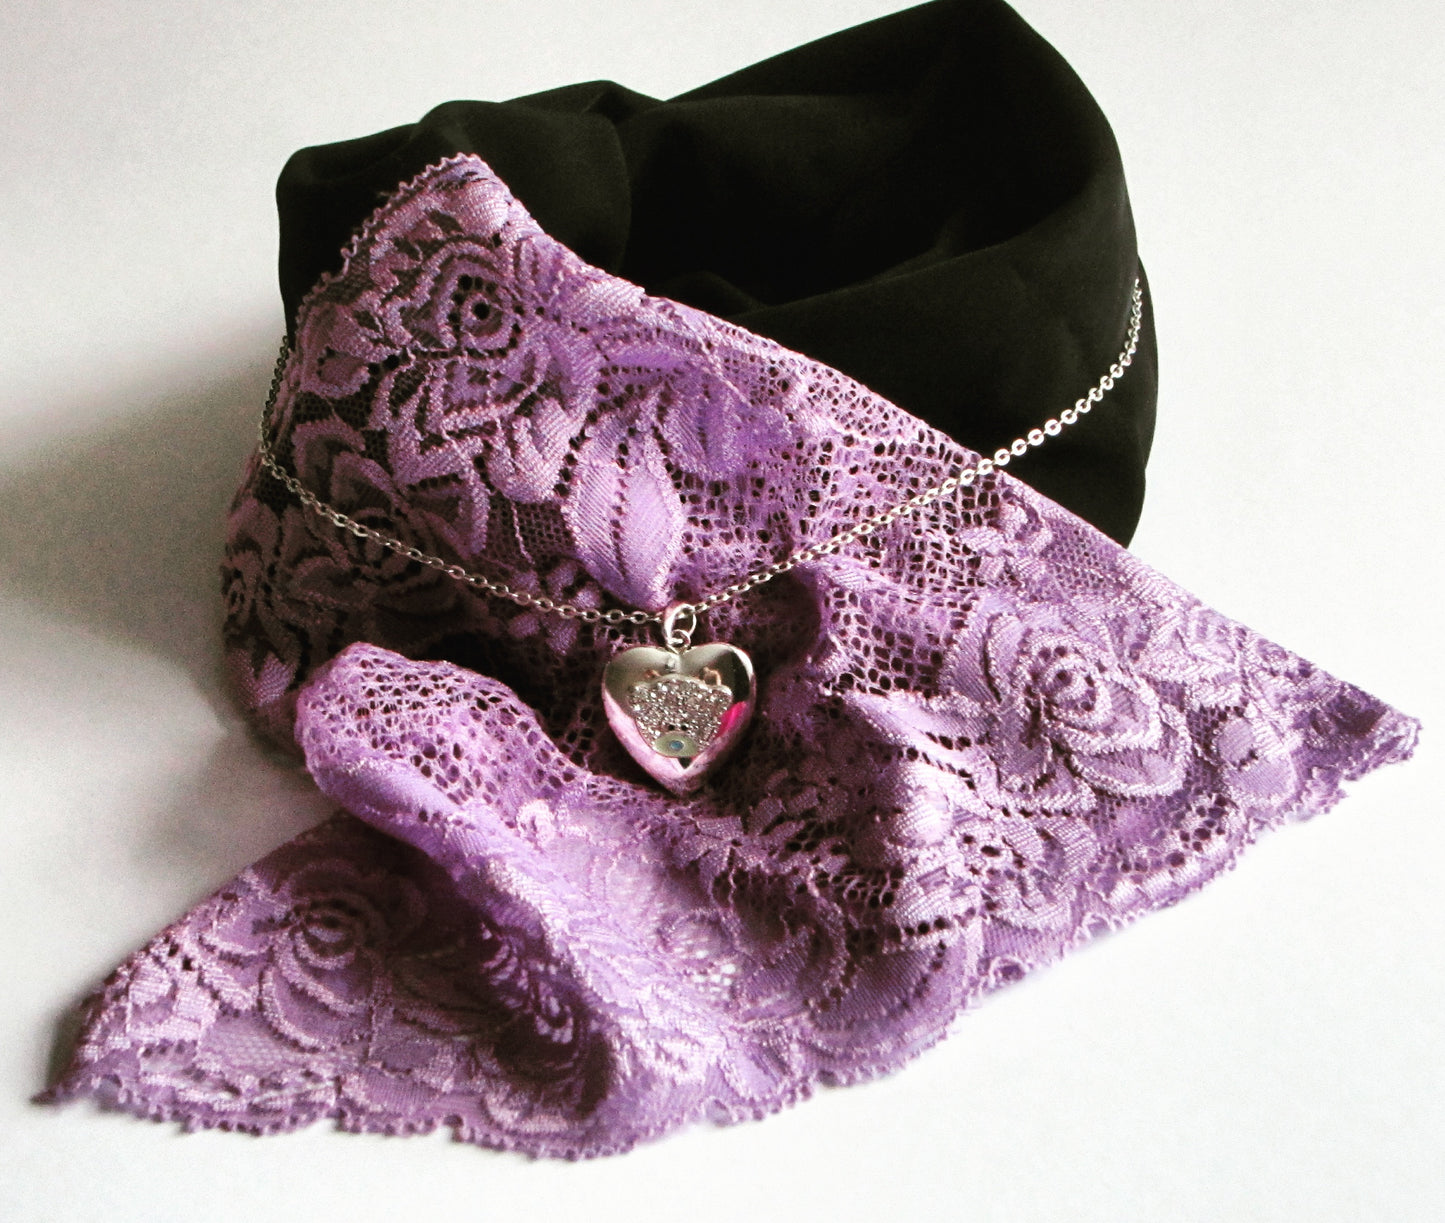 Black Vintage Style Scarf With Lilac Lace Trim - Style Showroom 